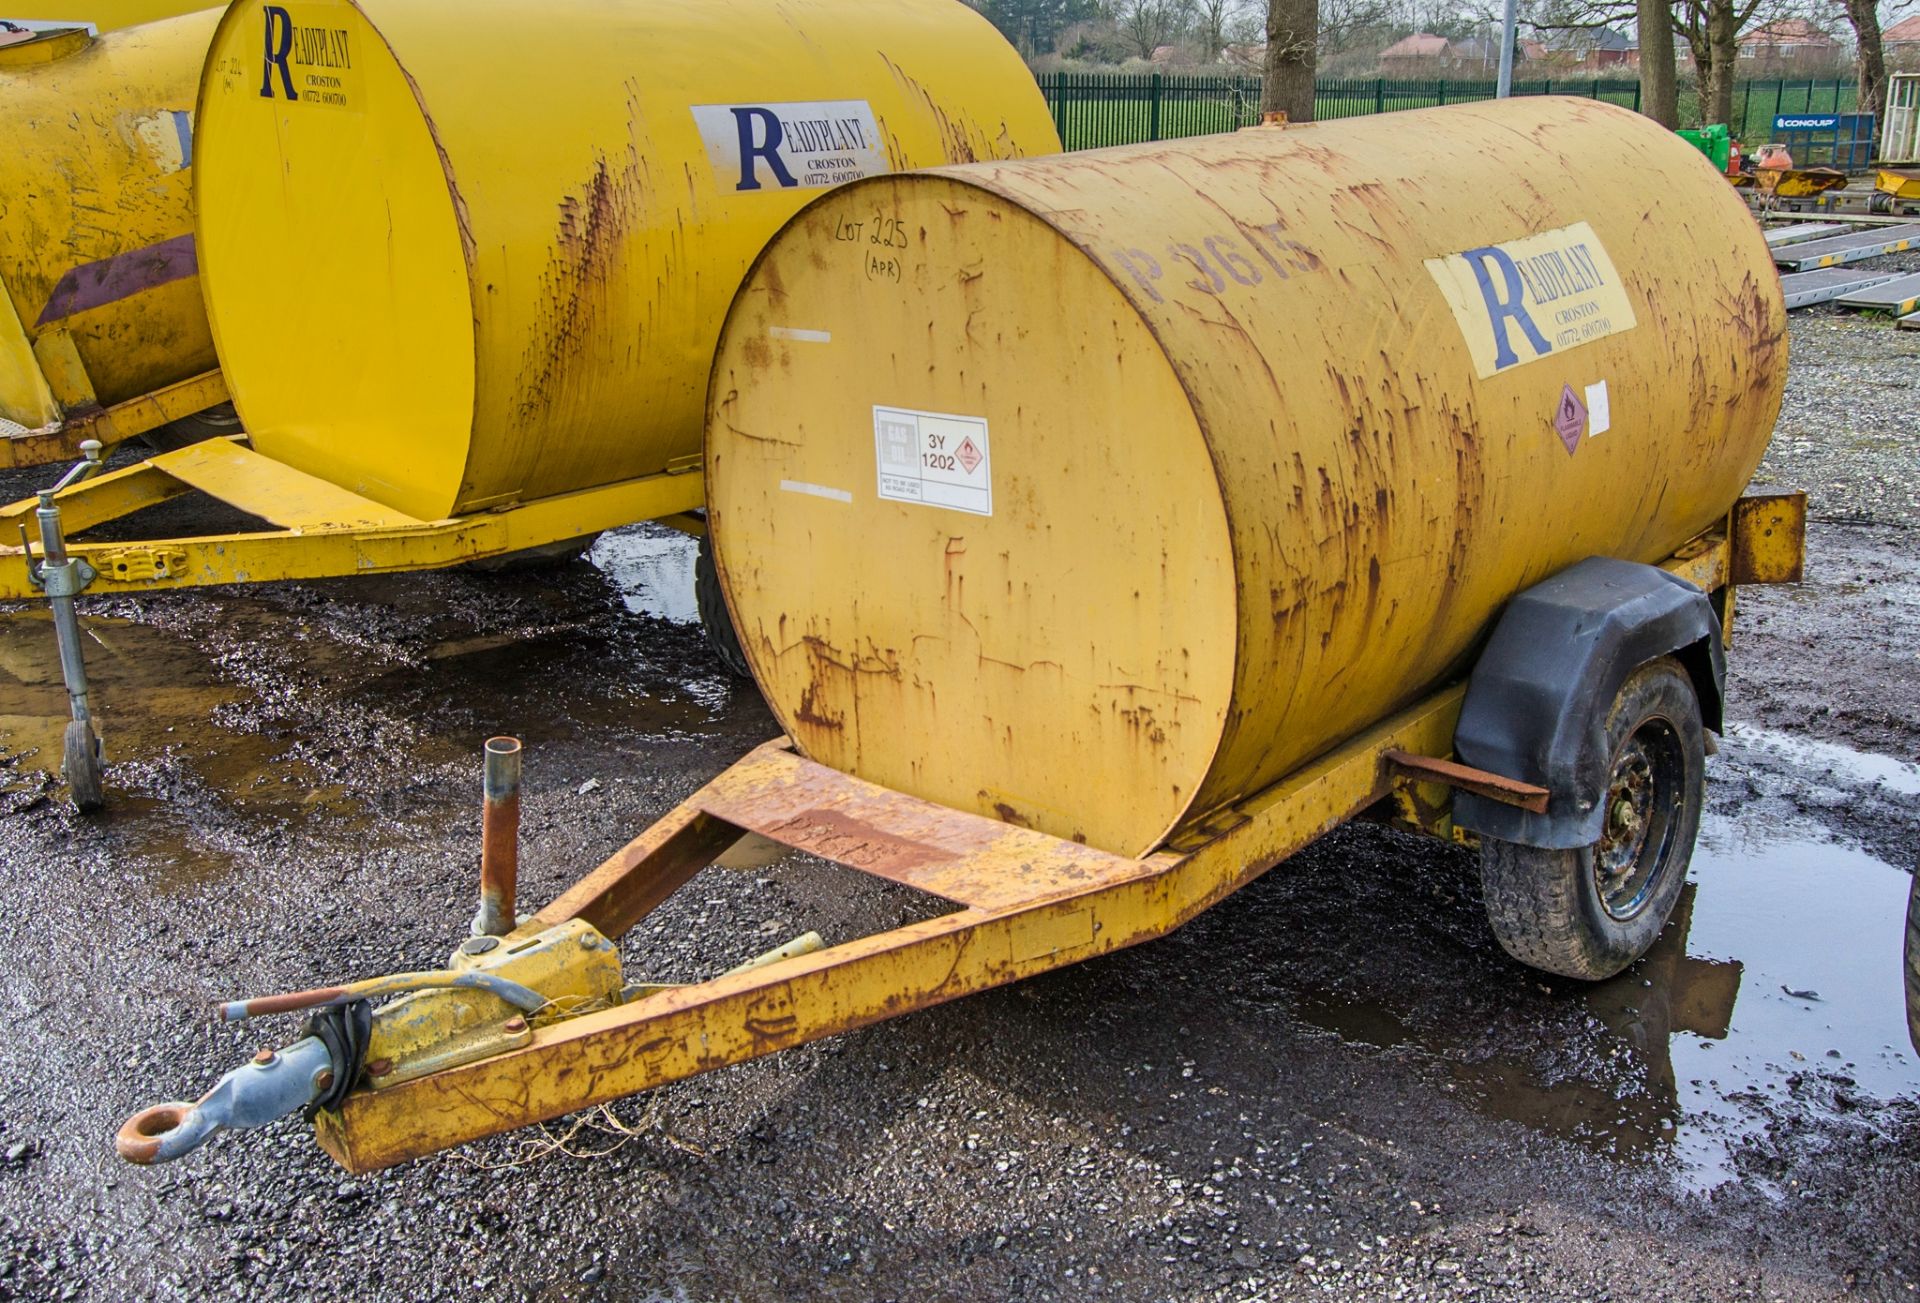 Single axle fast tow mobile bunded fuel bowser c/w petrol pump (parts missing), delivery hose &